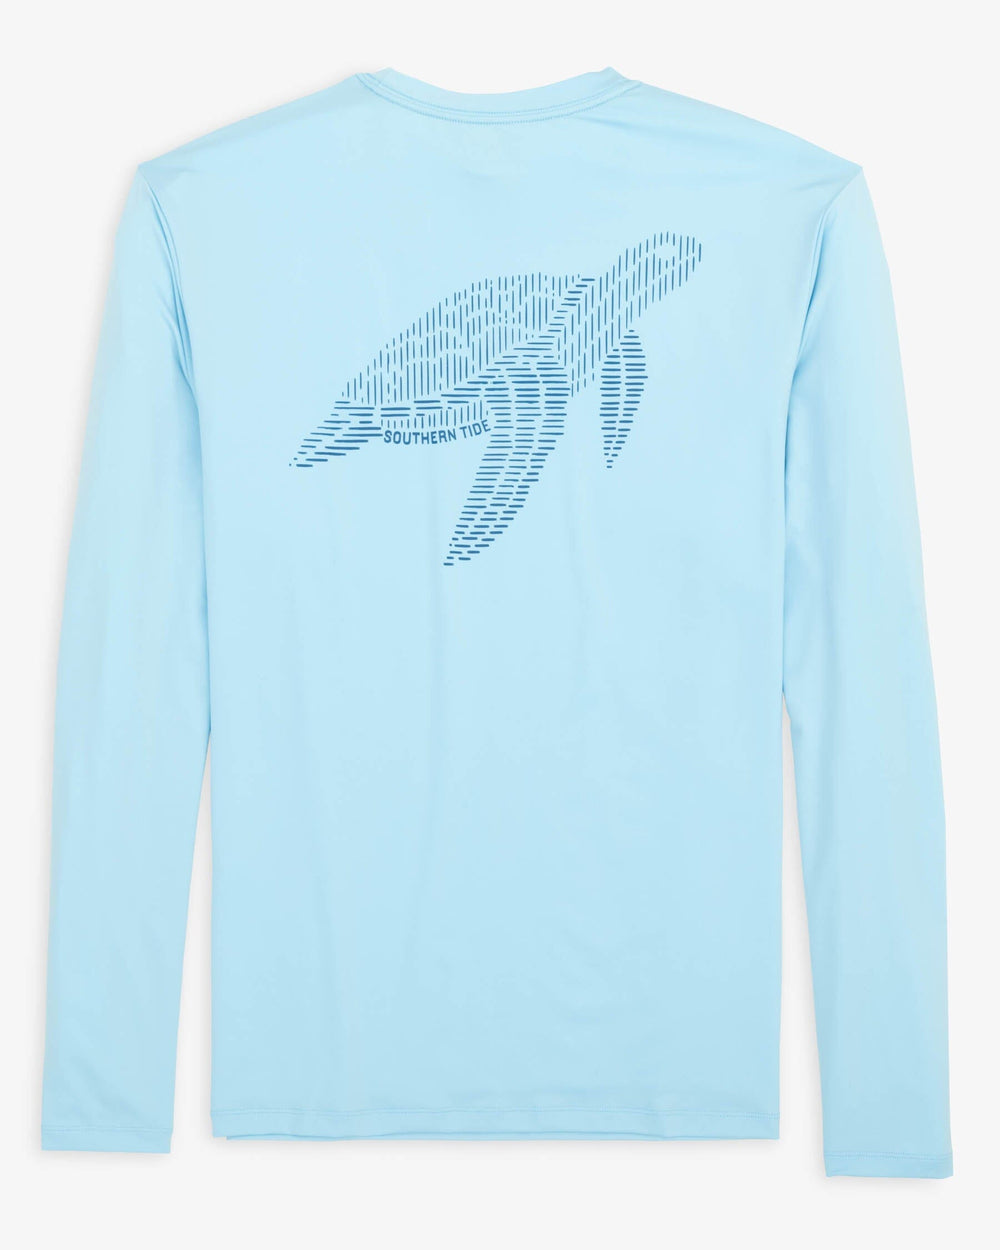 The back view of the Southern Tide Lined Turtle Long Sleeve Performance T-Shirt by Southern Tide - Rain Water